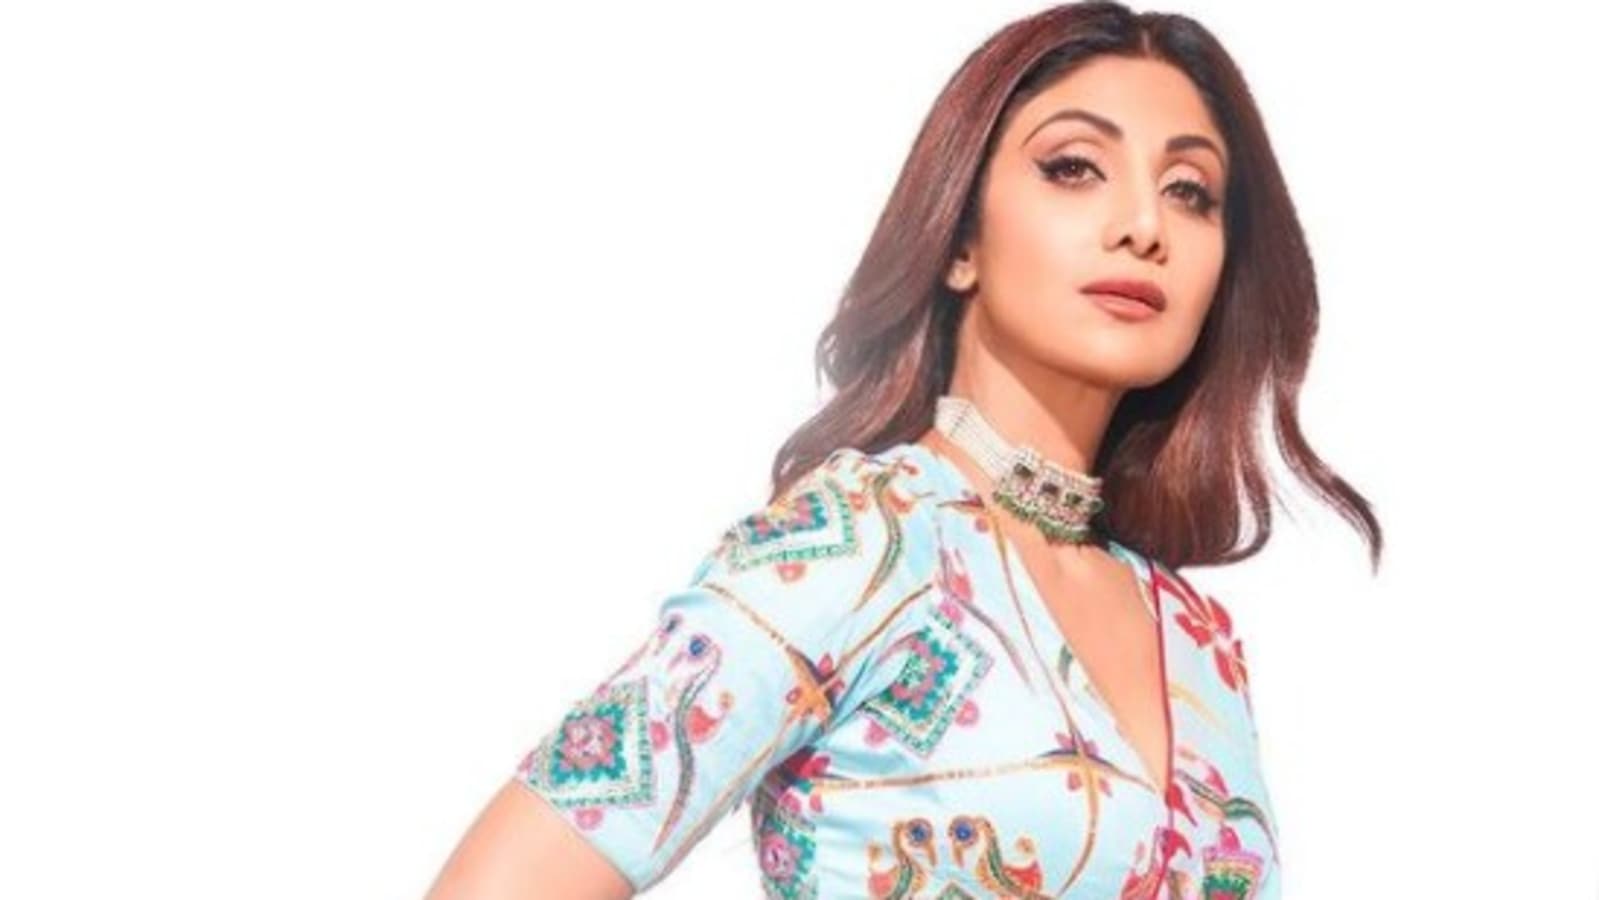 Xxx Shilpa Shati - Shilpa Shetty shares pics from first photoshoot after Raj Kundra's arrest,  is 'determined to rise'. See here | Bollywood - Hindustan Times